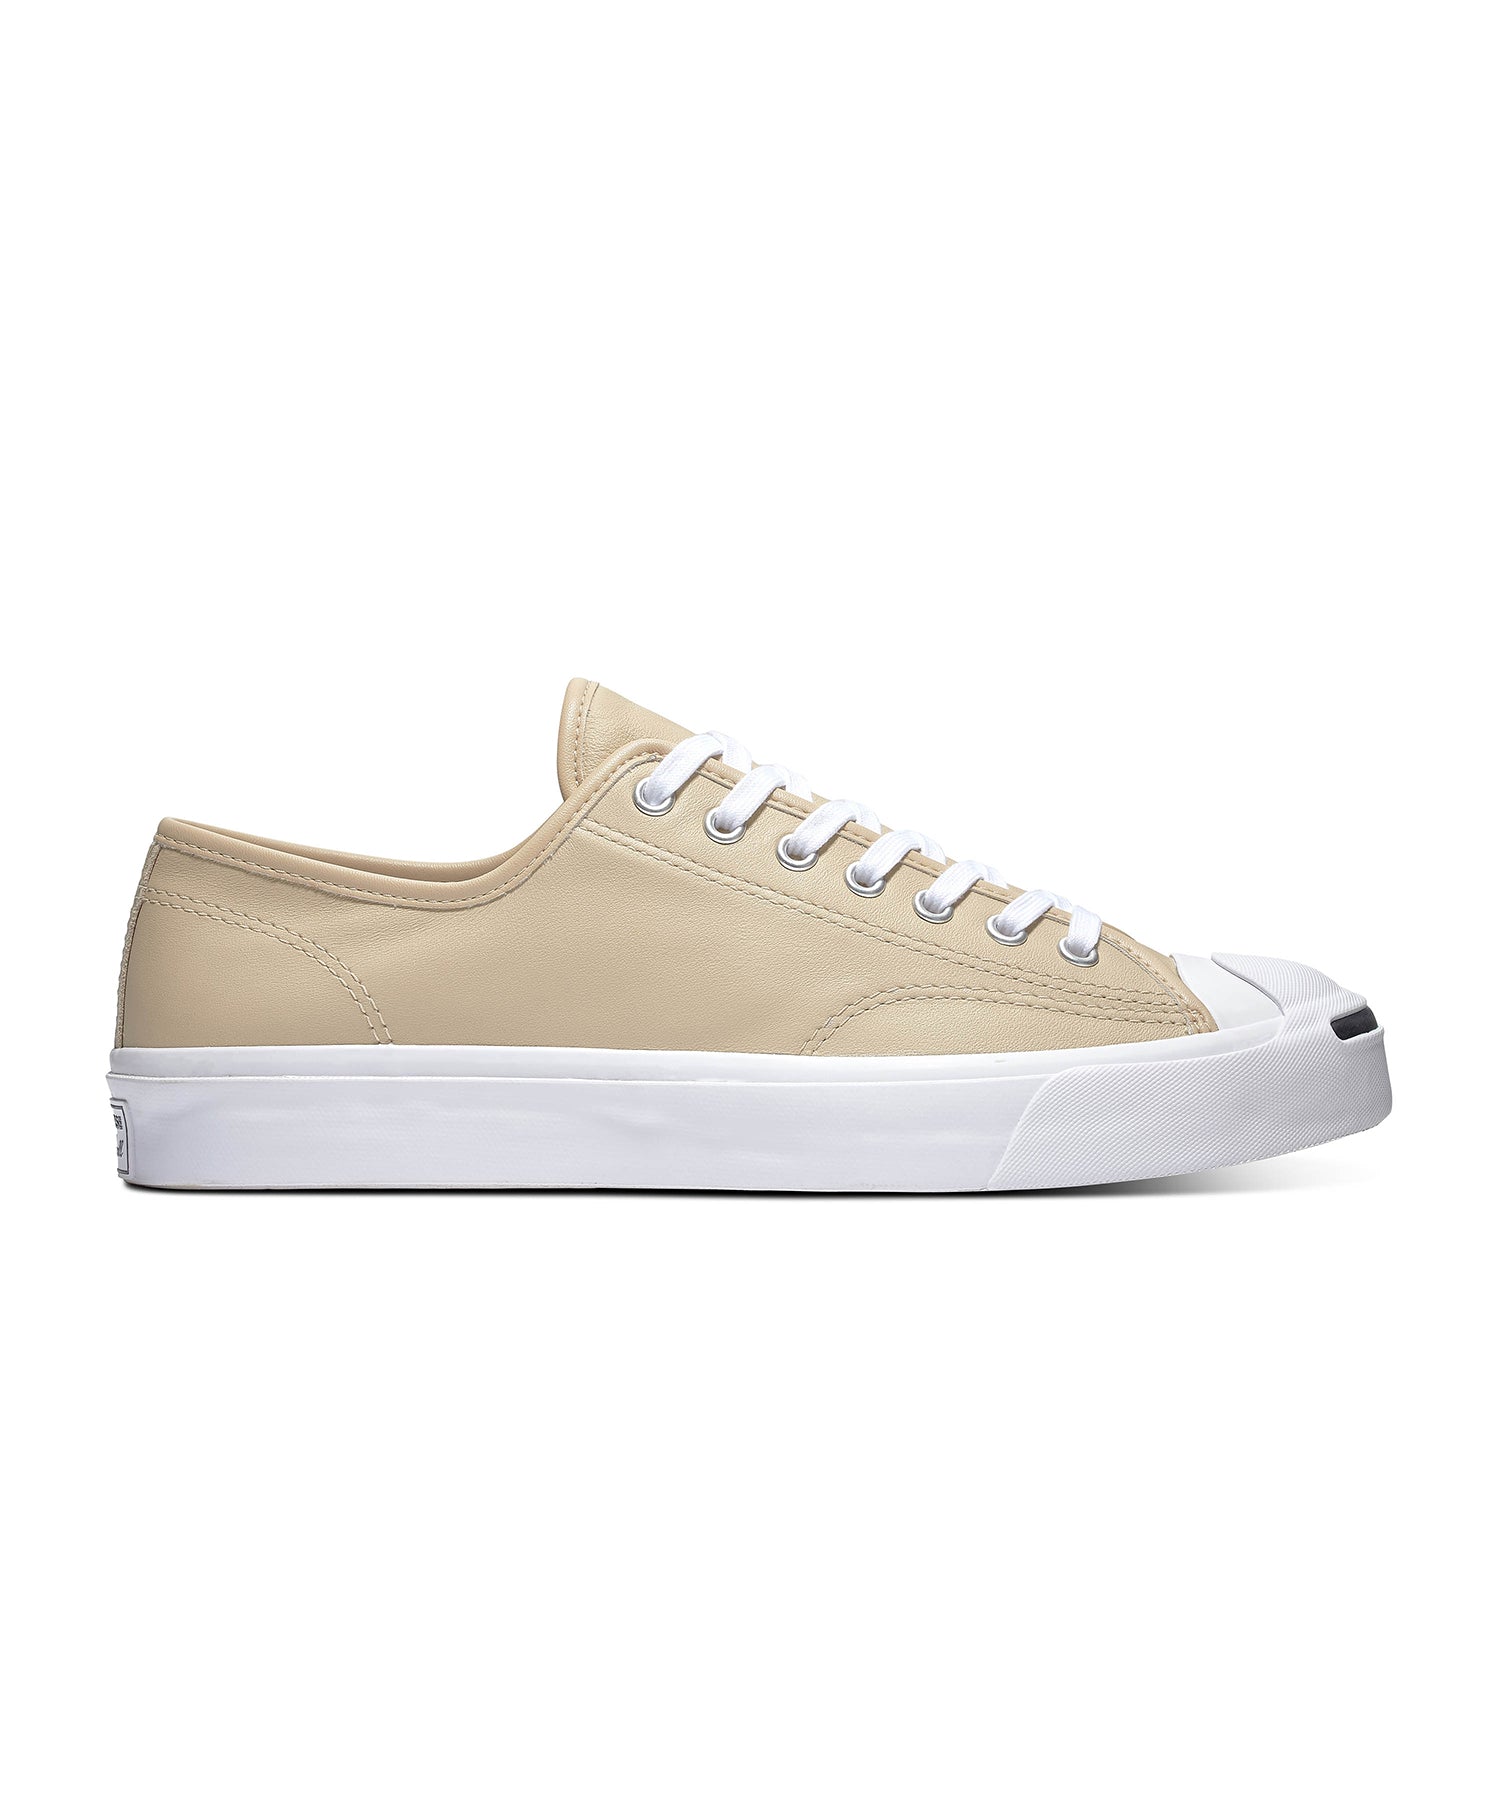 Converse Leather Jack Purcell in Desert 